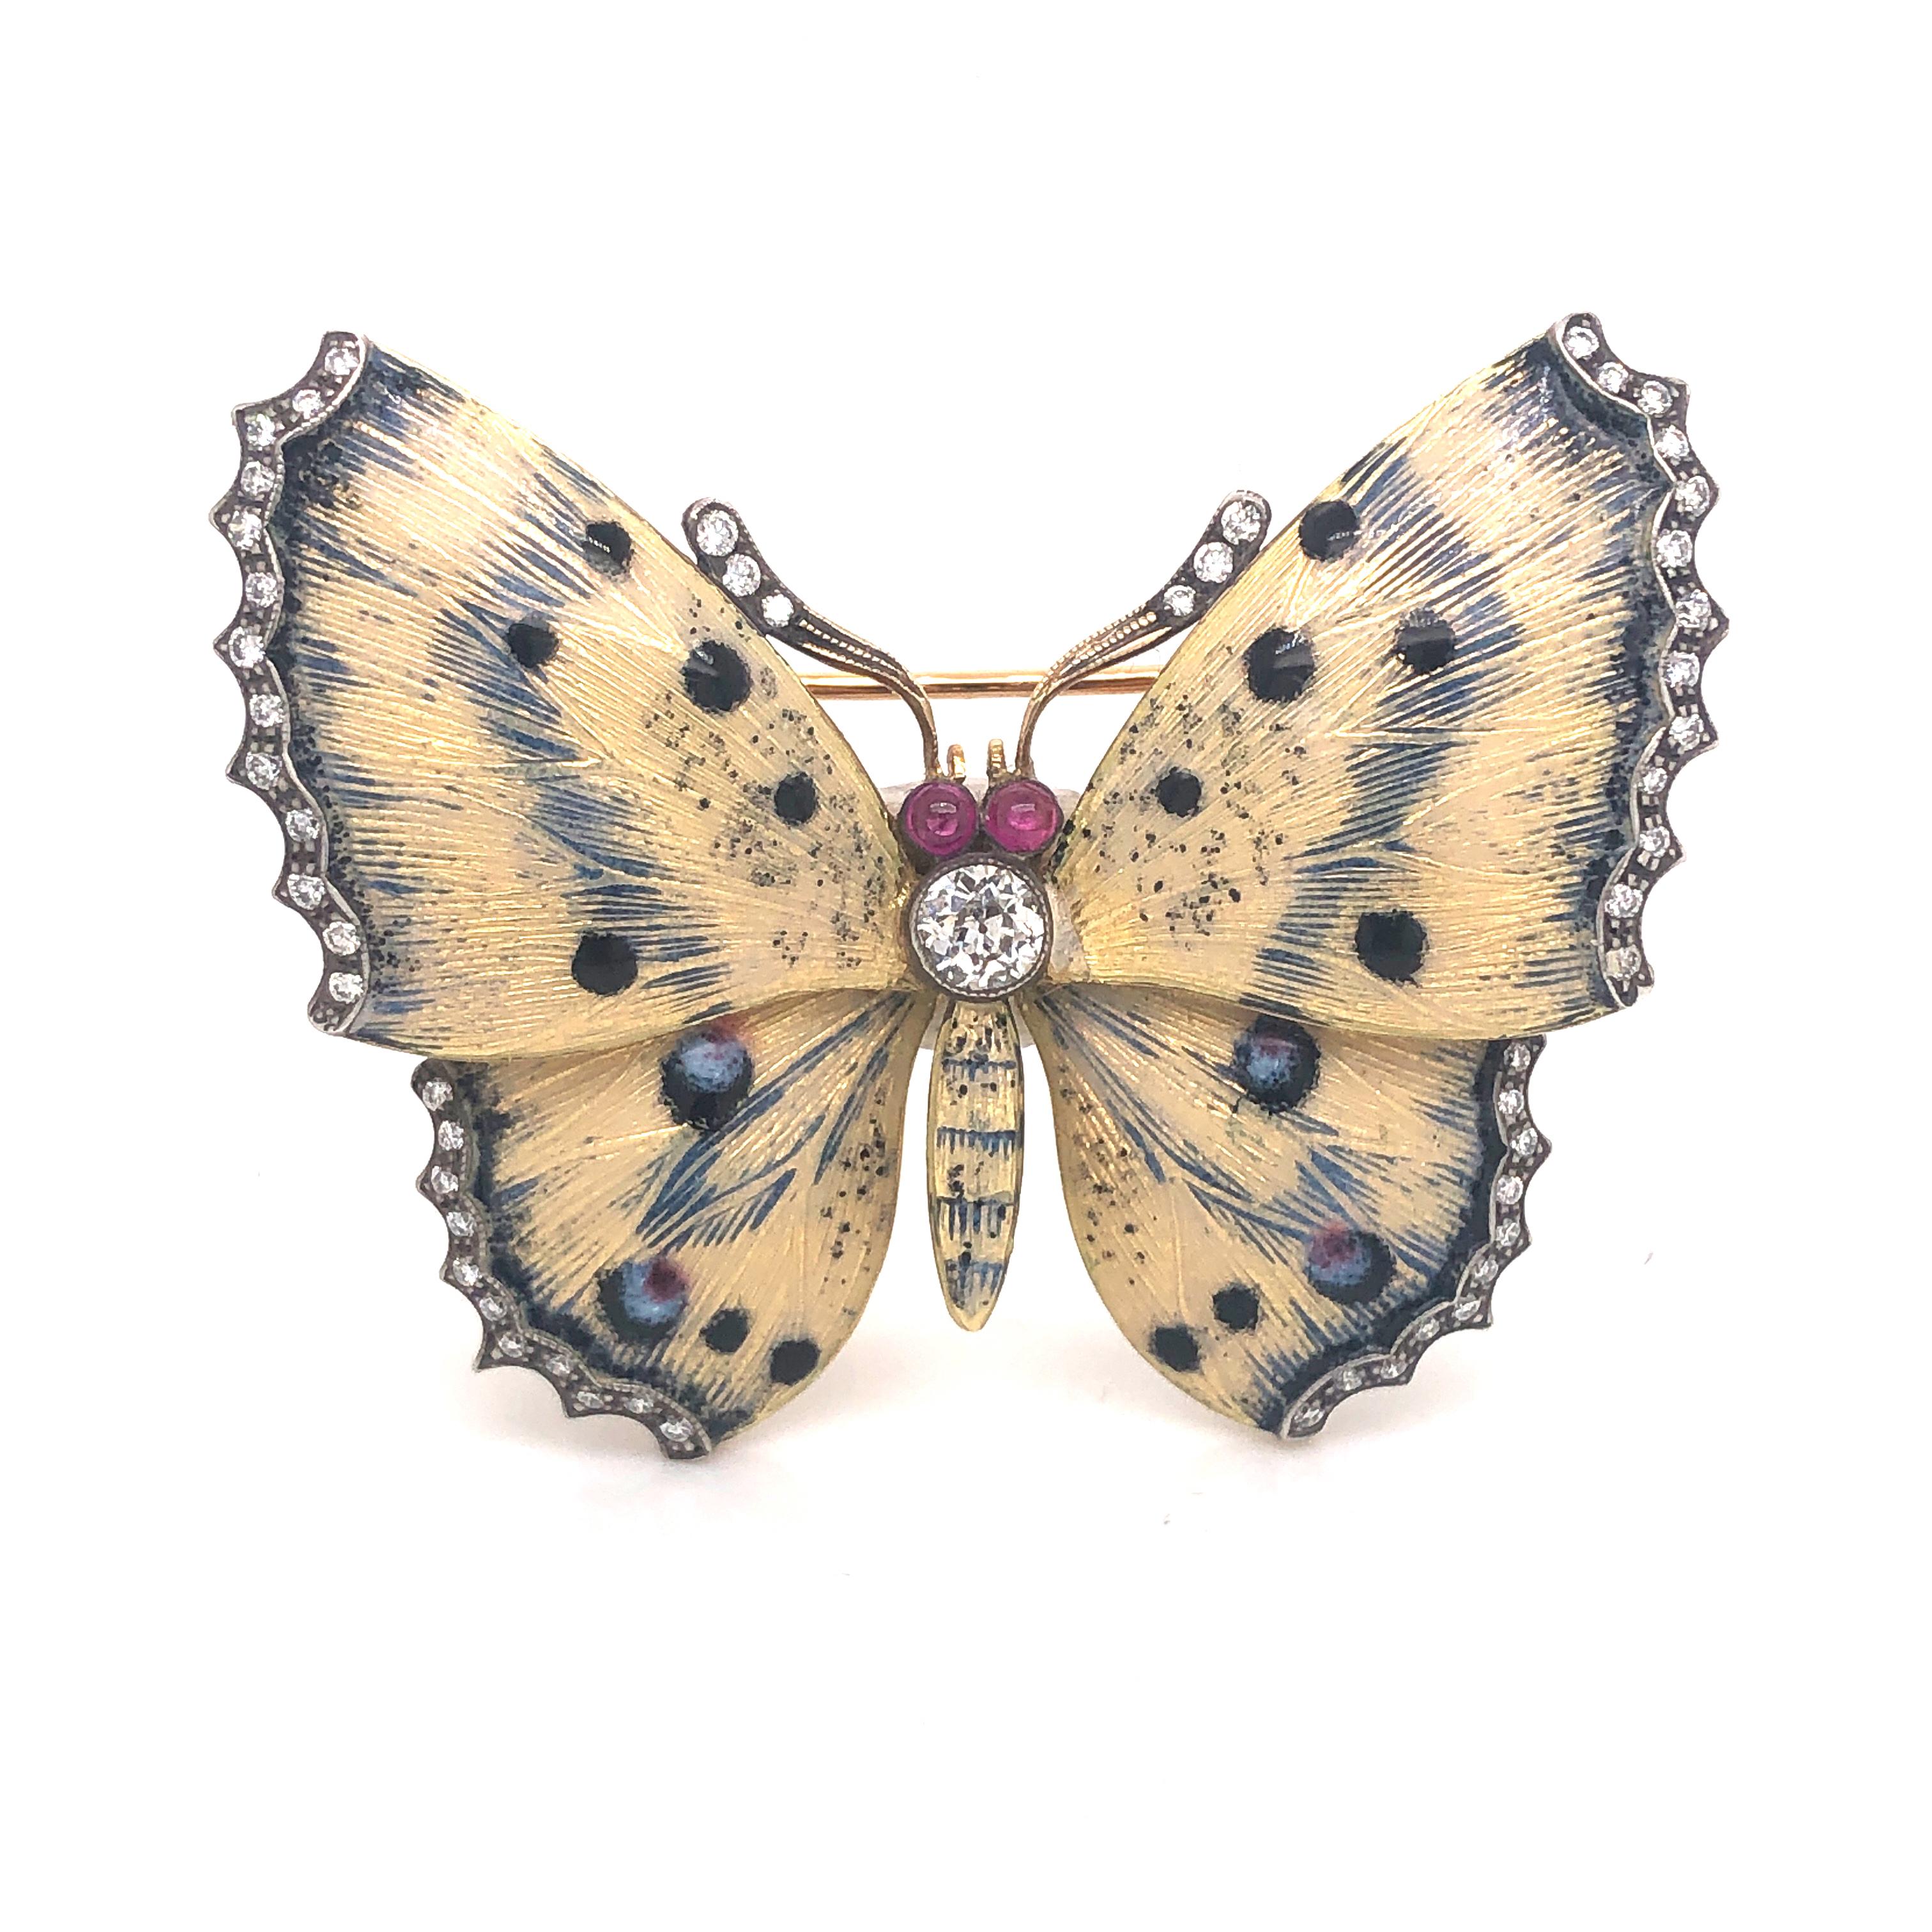 A cream and dark blue guilloche enamel butterfly brooch, set with a single brilliant-cut diamond to the thorax, and further diamonds set to the wing edges, weighing approximately 0.75ct in total, with two cabochon-cut rubies for the eyes, all